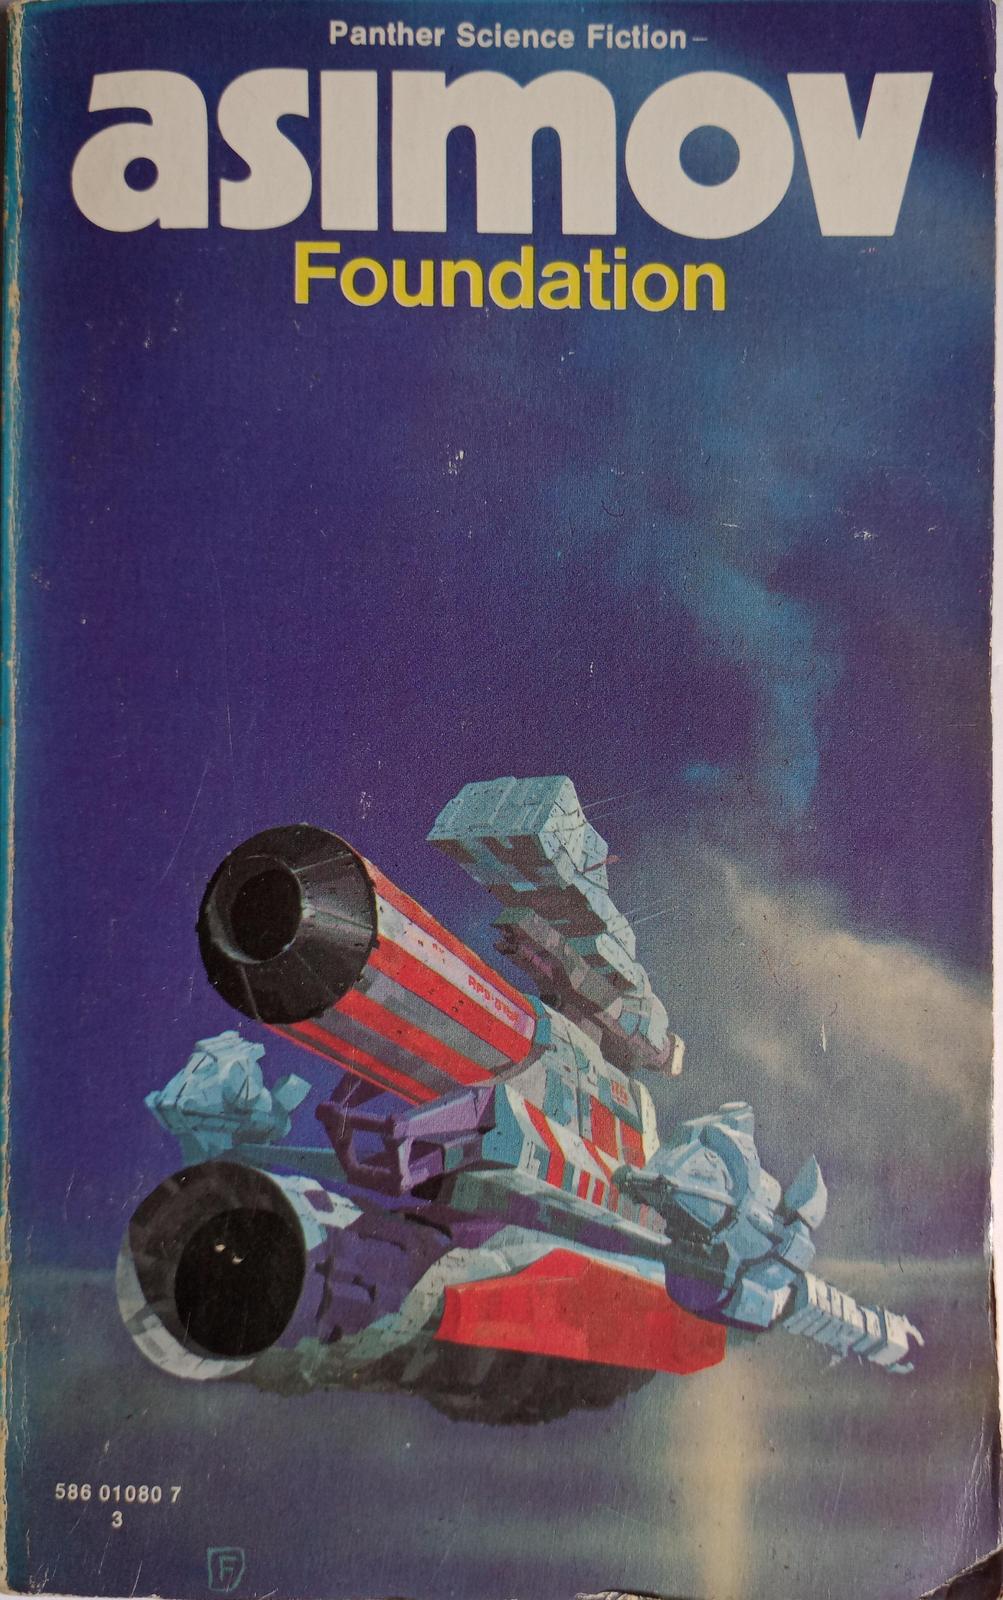 Foundation (1960, Panther Books)